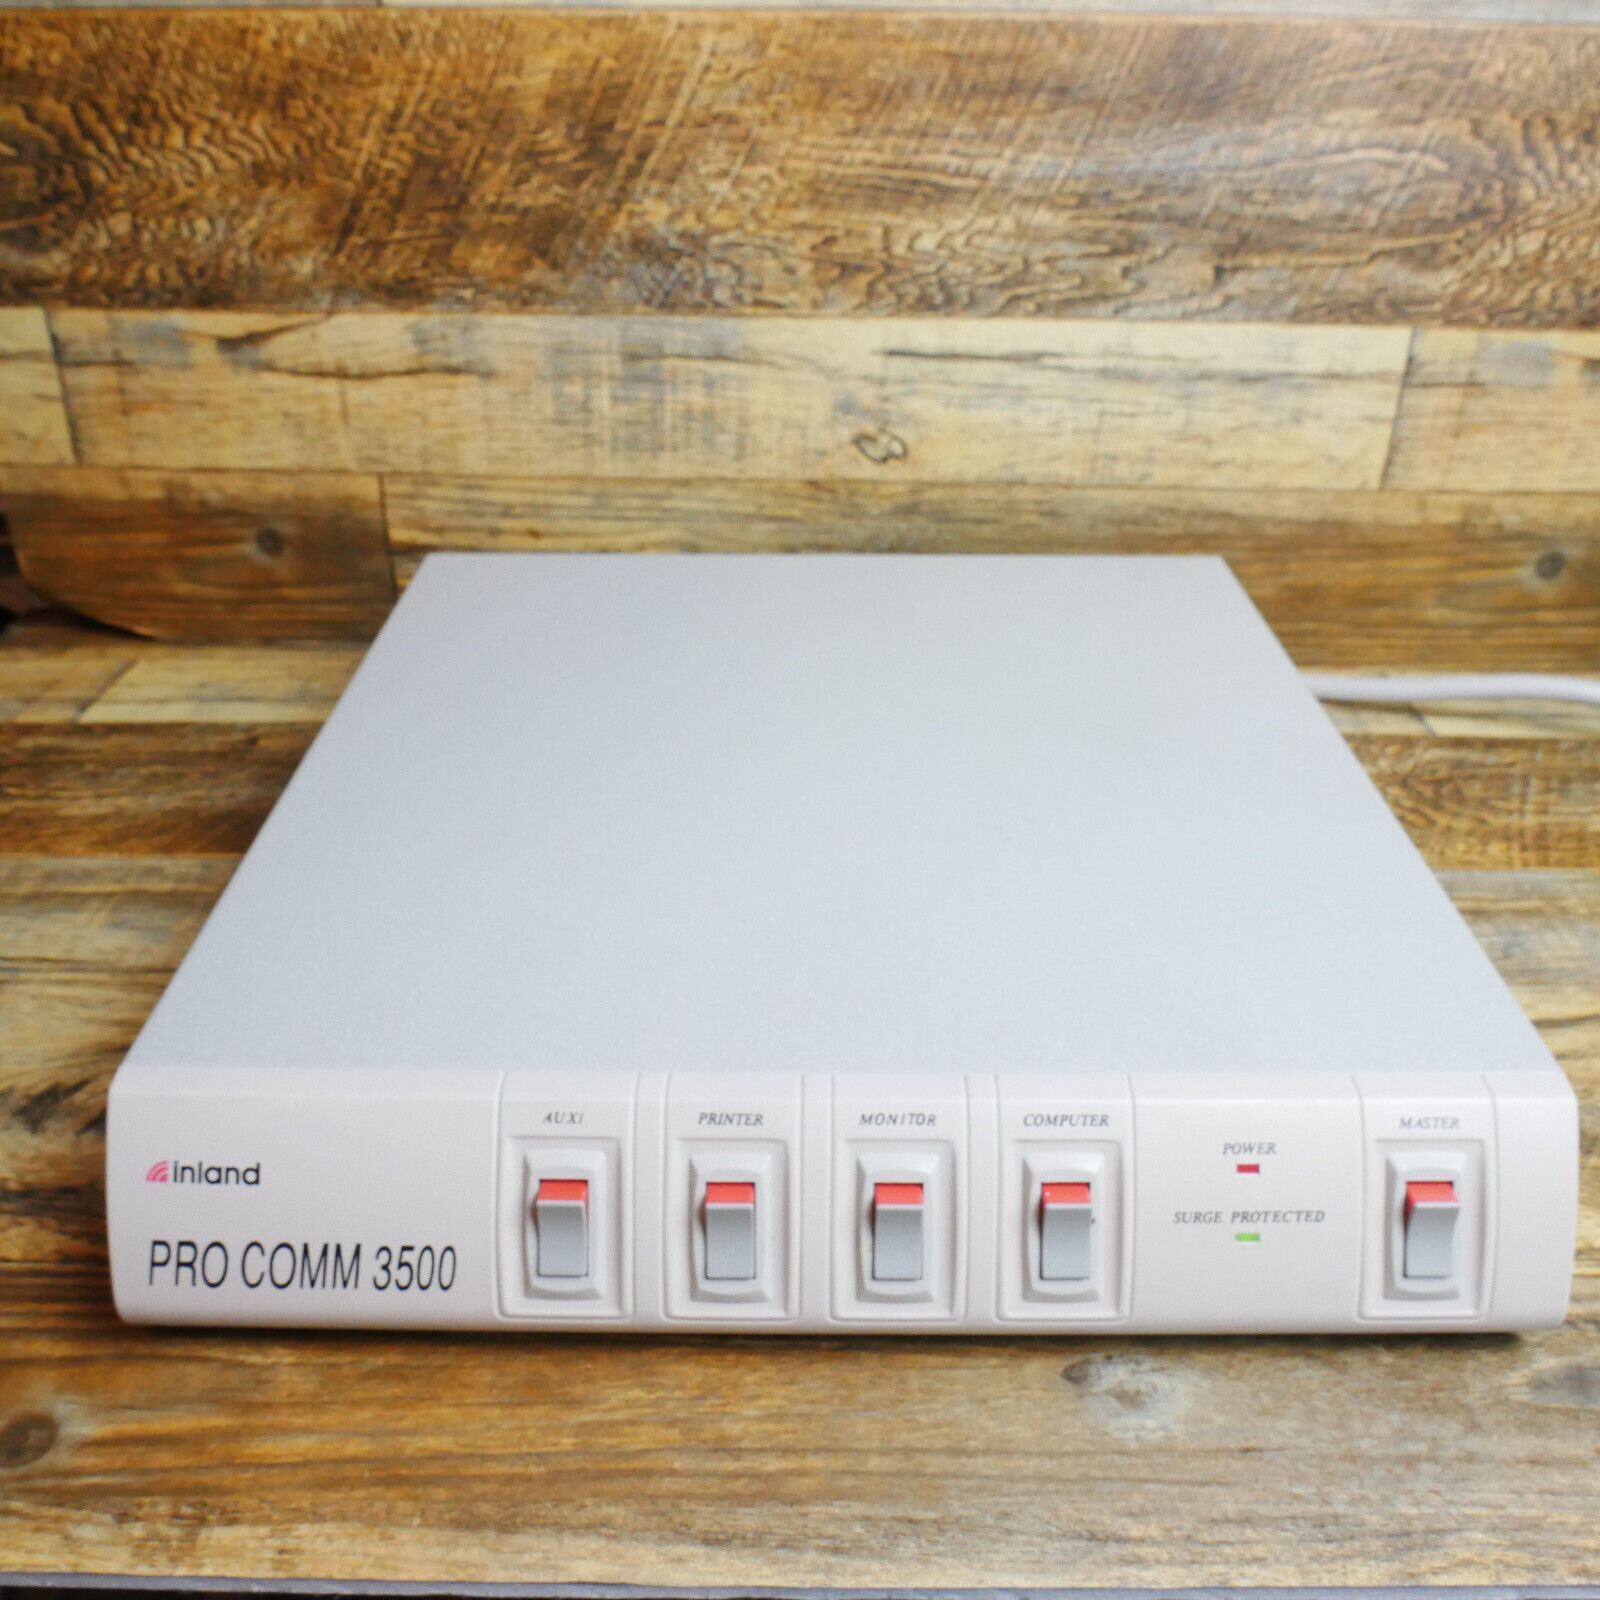 Inland Pro Commander 3500 Power Center w/ 5 Outlets